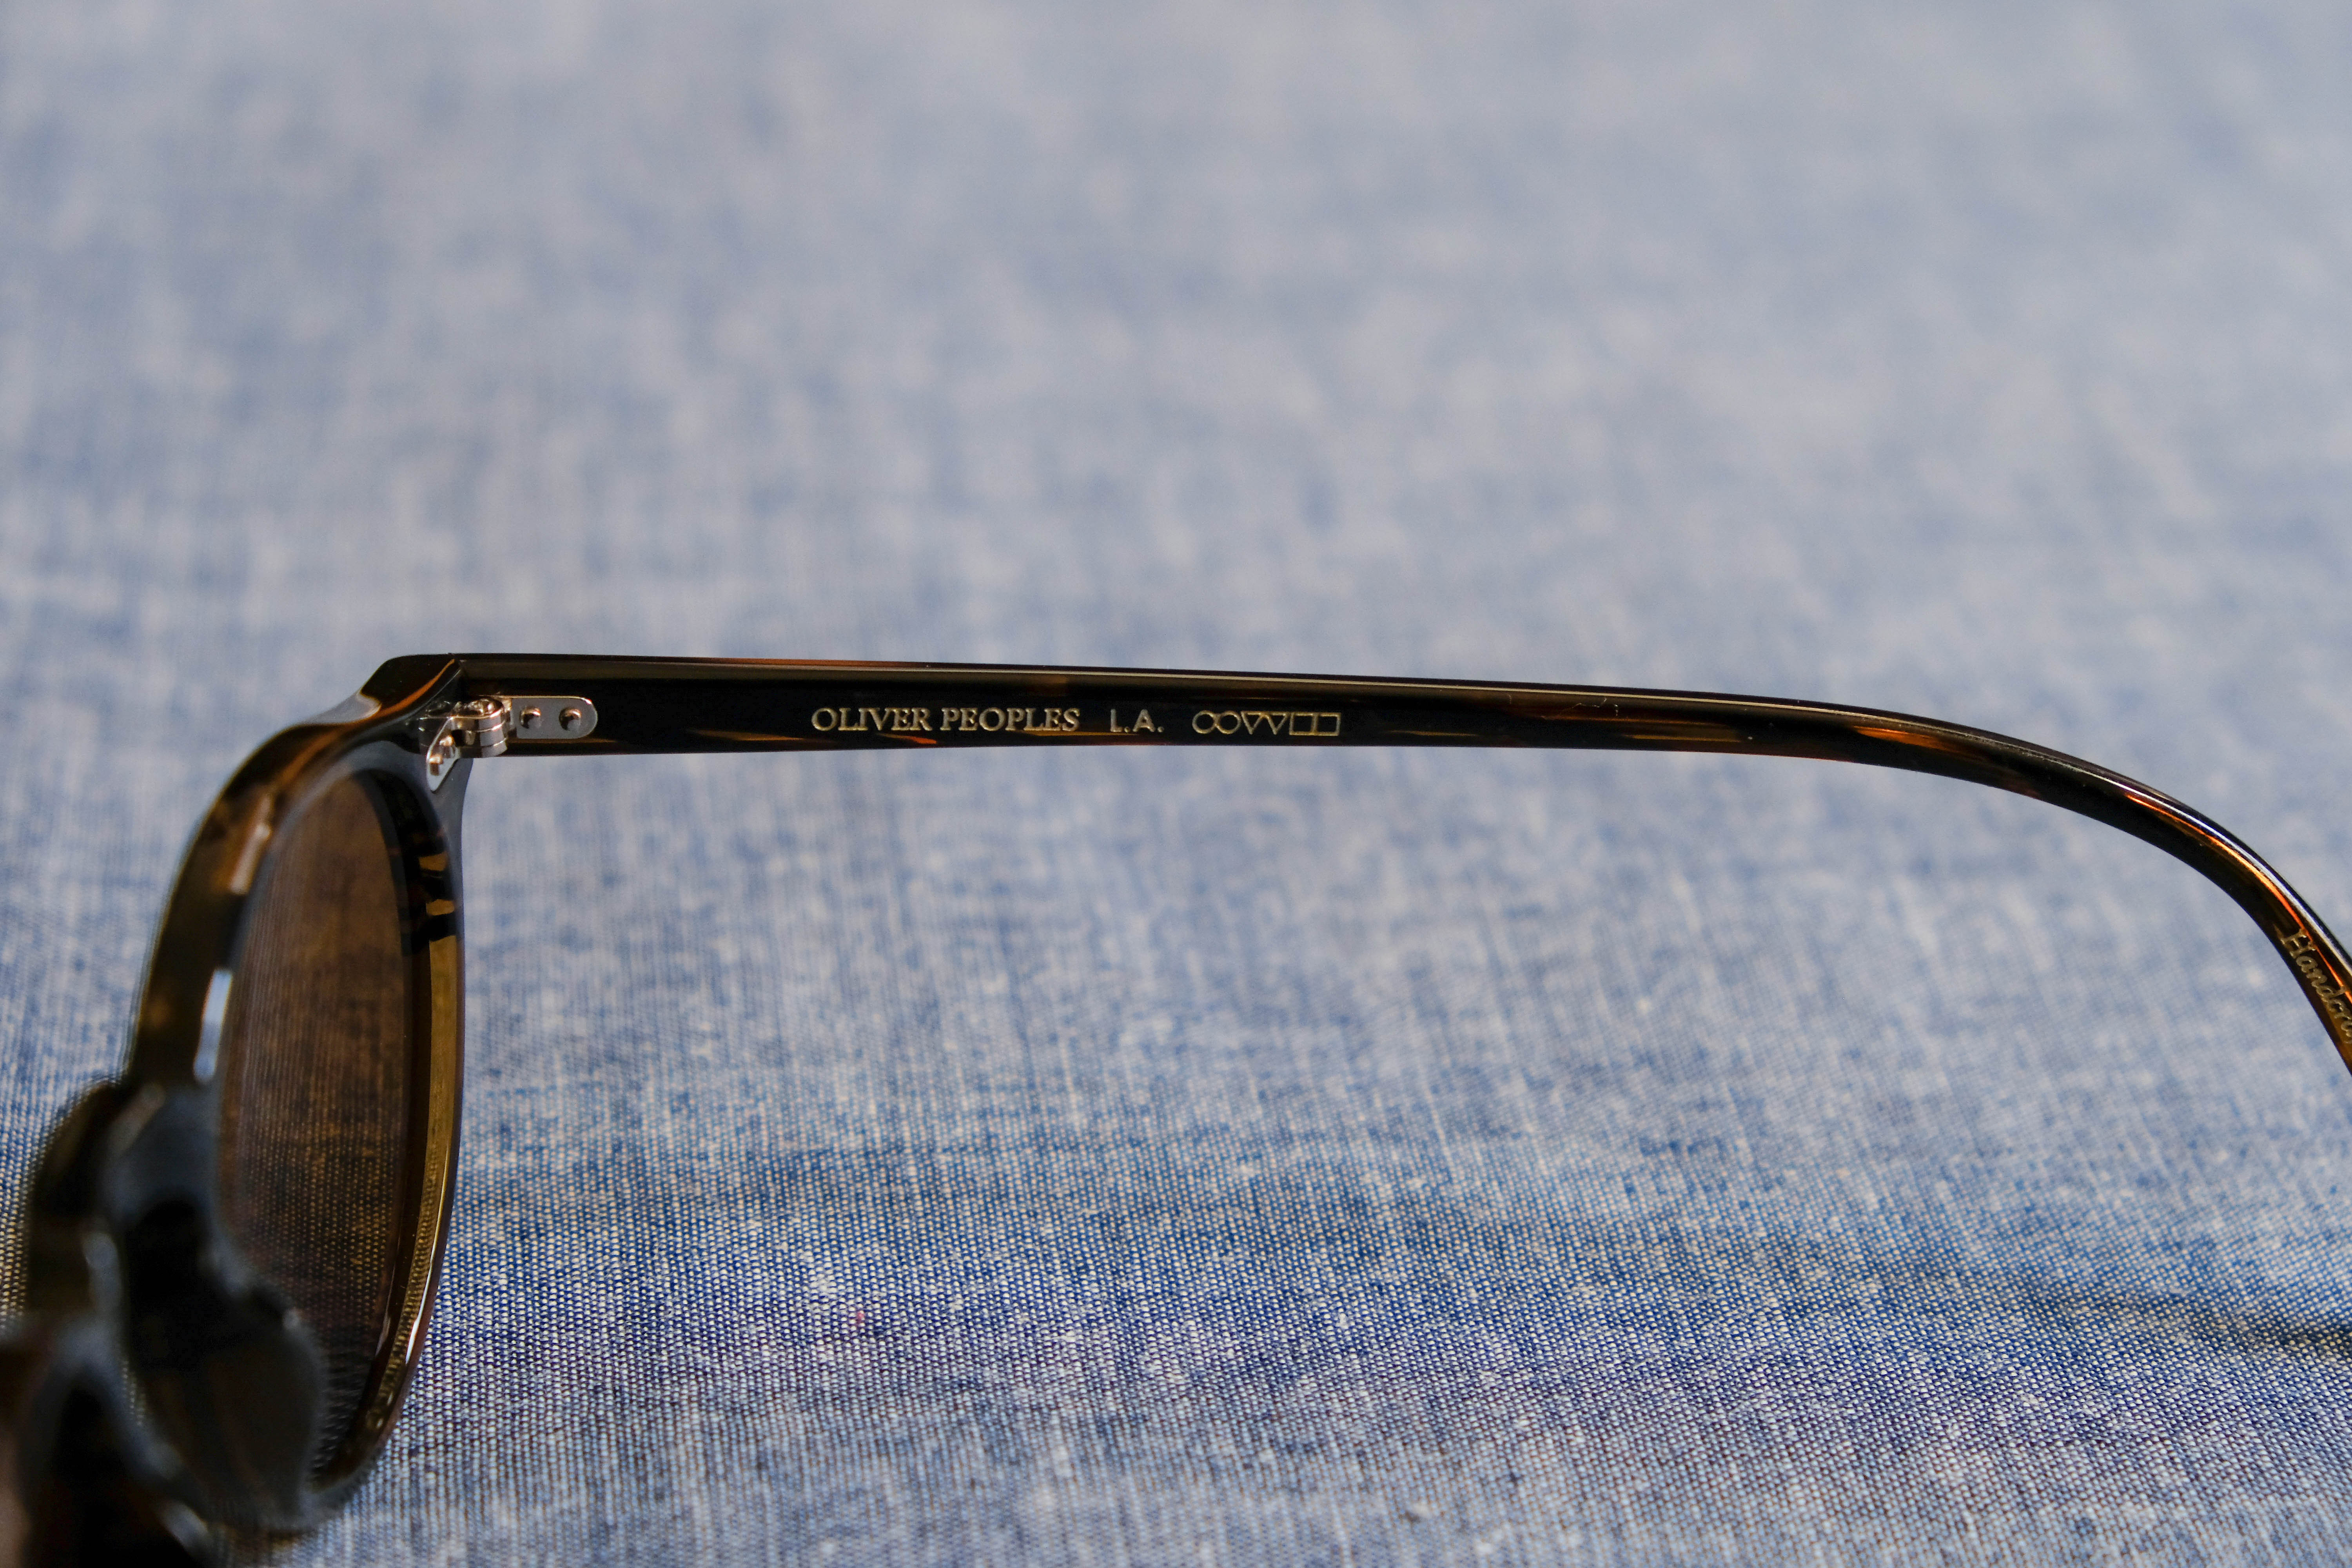 oliver peoples gregory peck sunglasses review